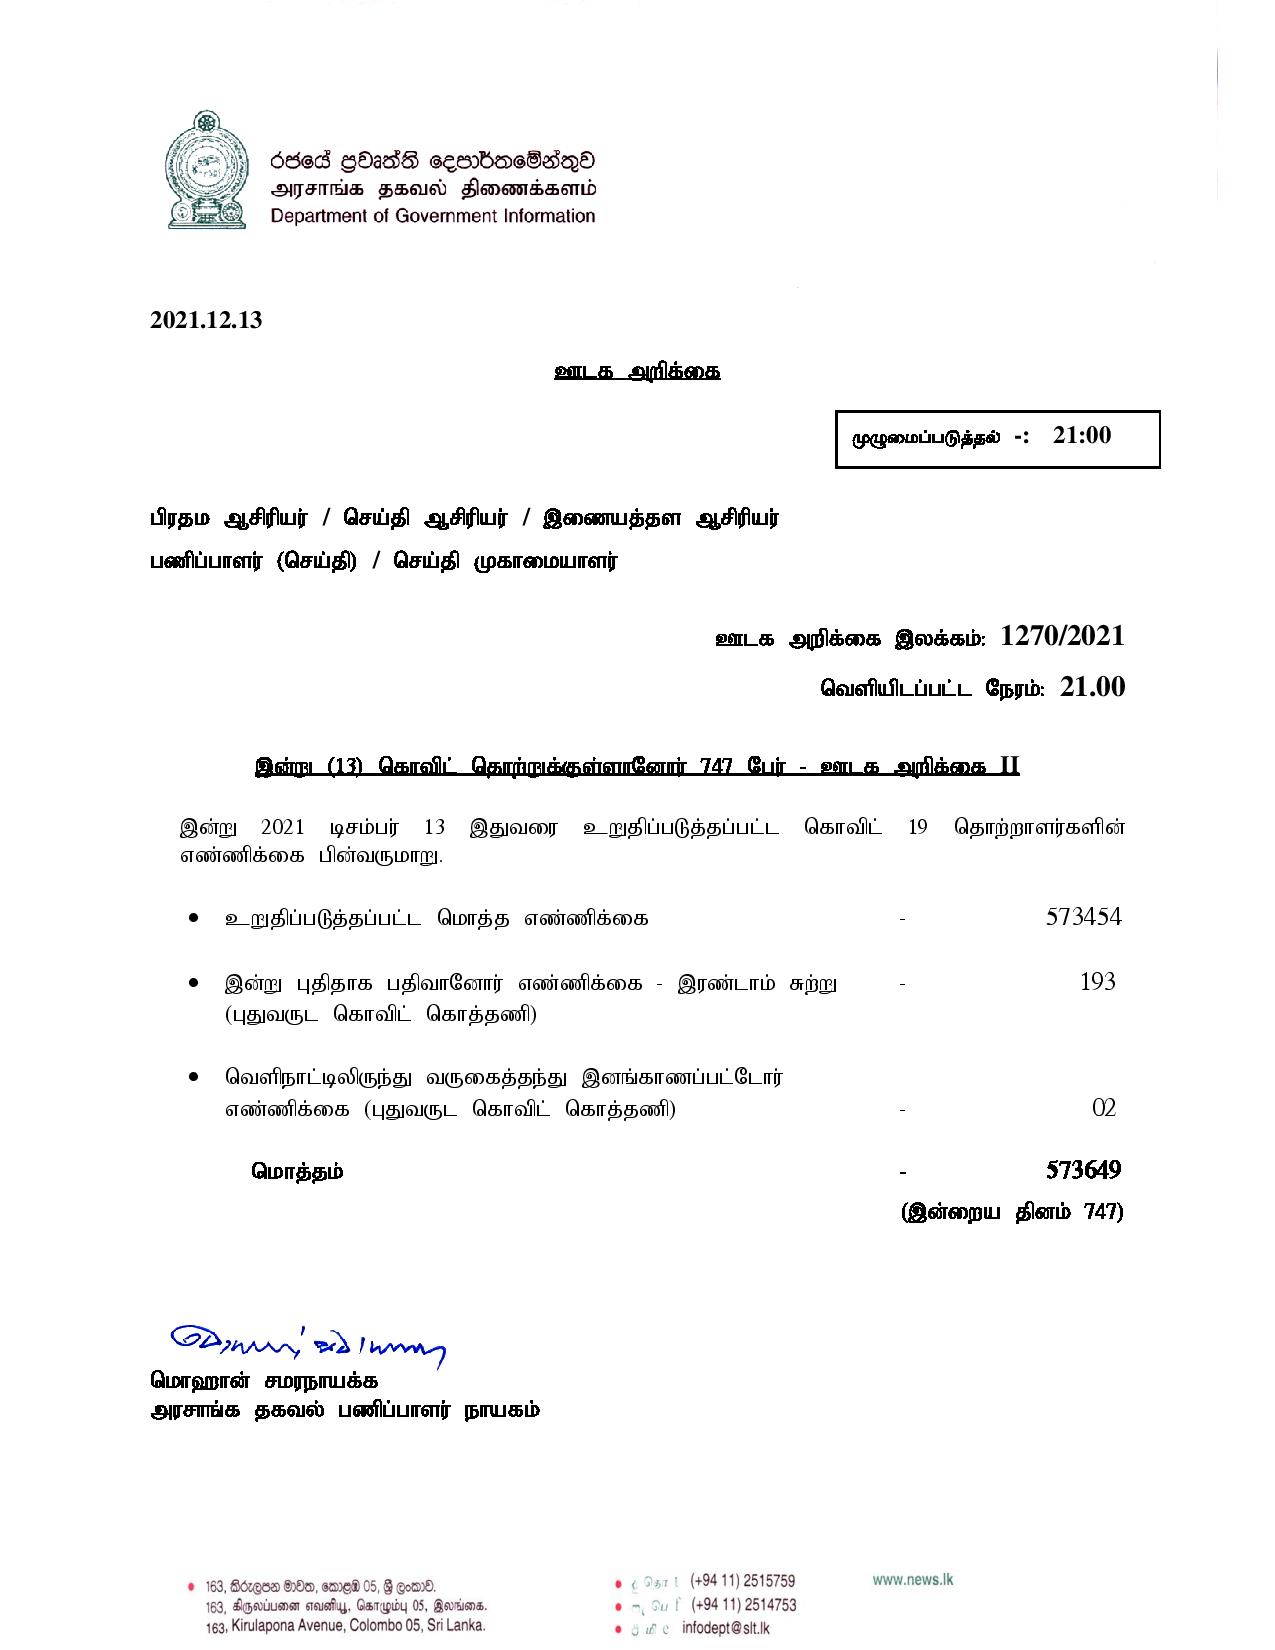 Press Release 1270 Tamil page 001